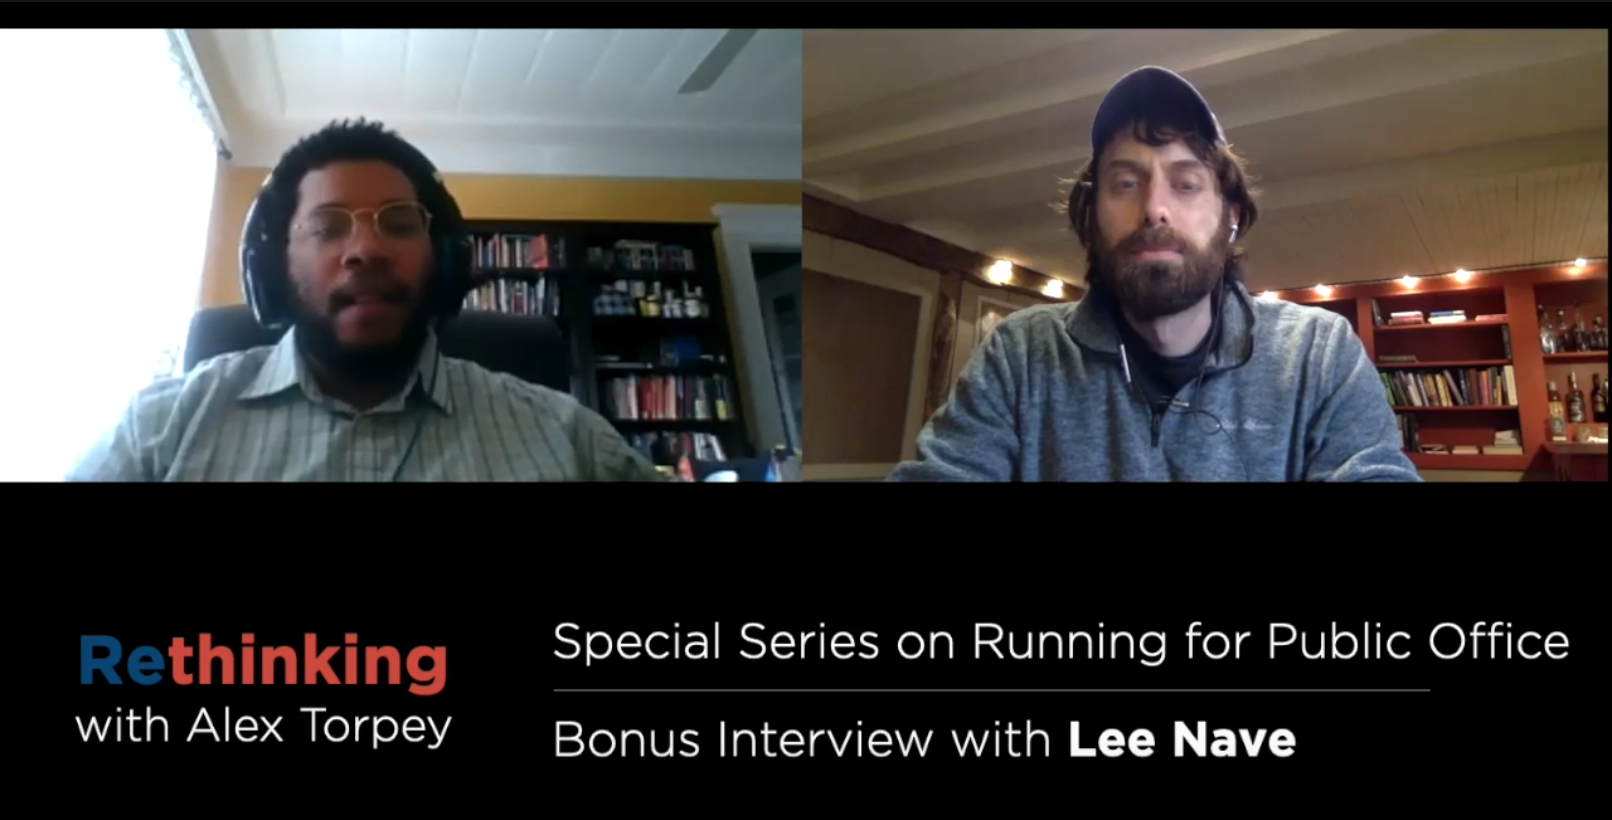 Bonus Interview: Former Boston City Council candidate Lee Nave